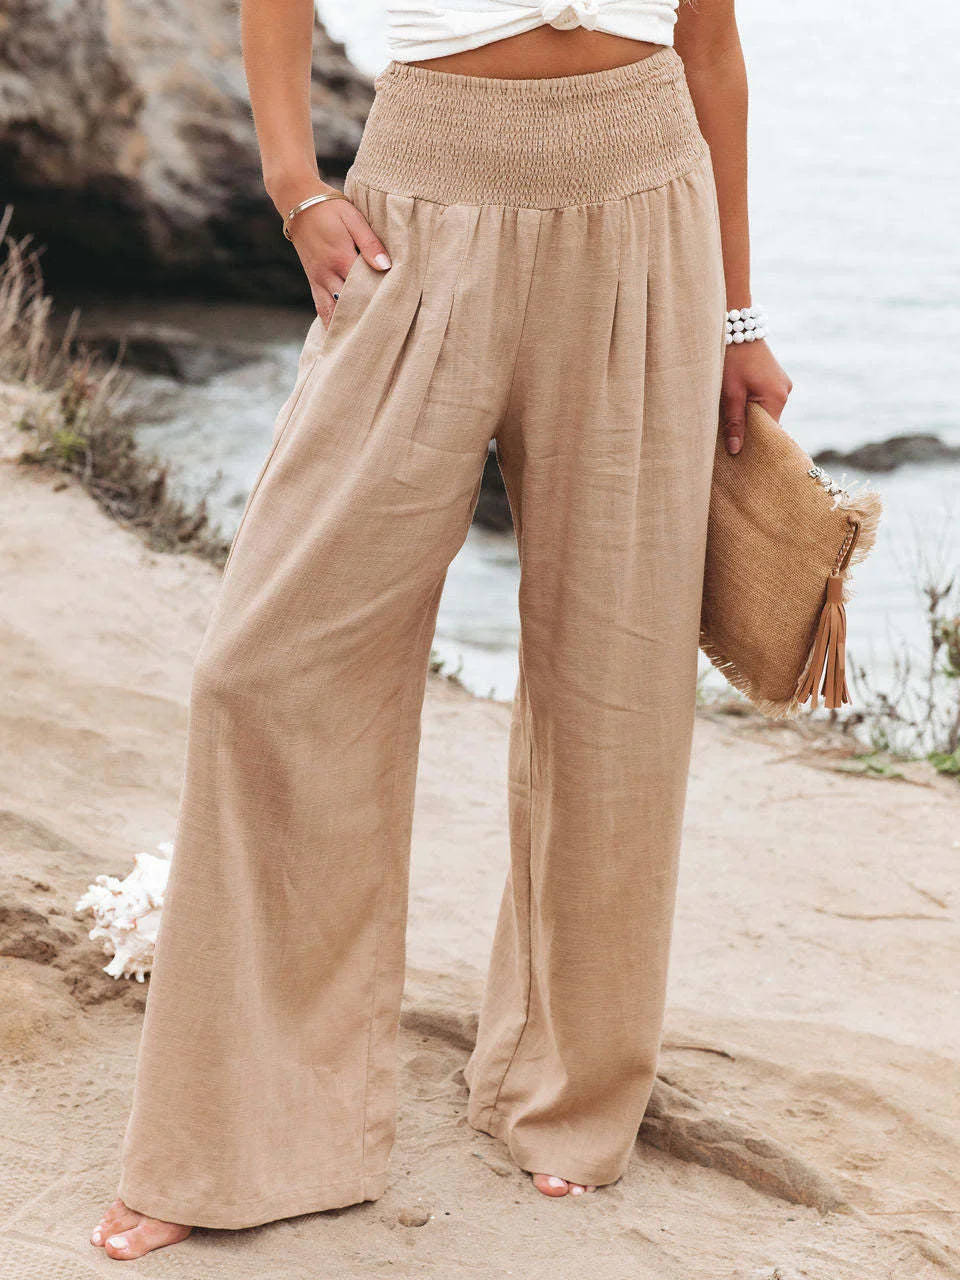 Spring Summer for Women 2022 New Women Pants Office Lady Cotton Linen Pockets Solid Loose Casual White Wide Leg Long Trousers